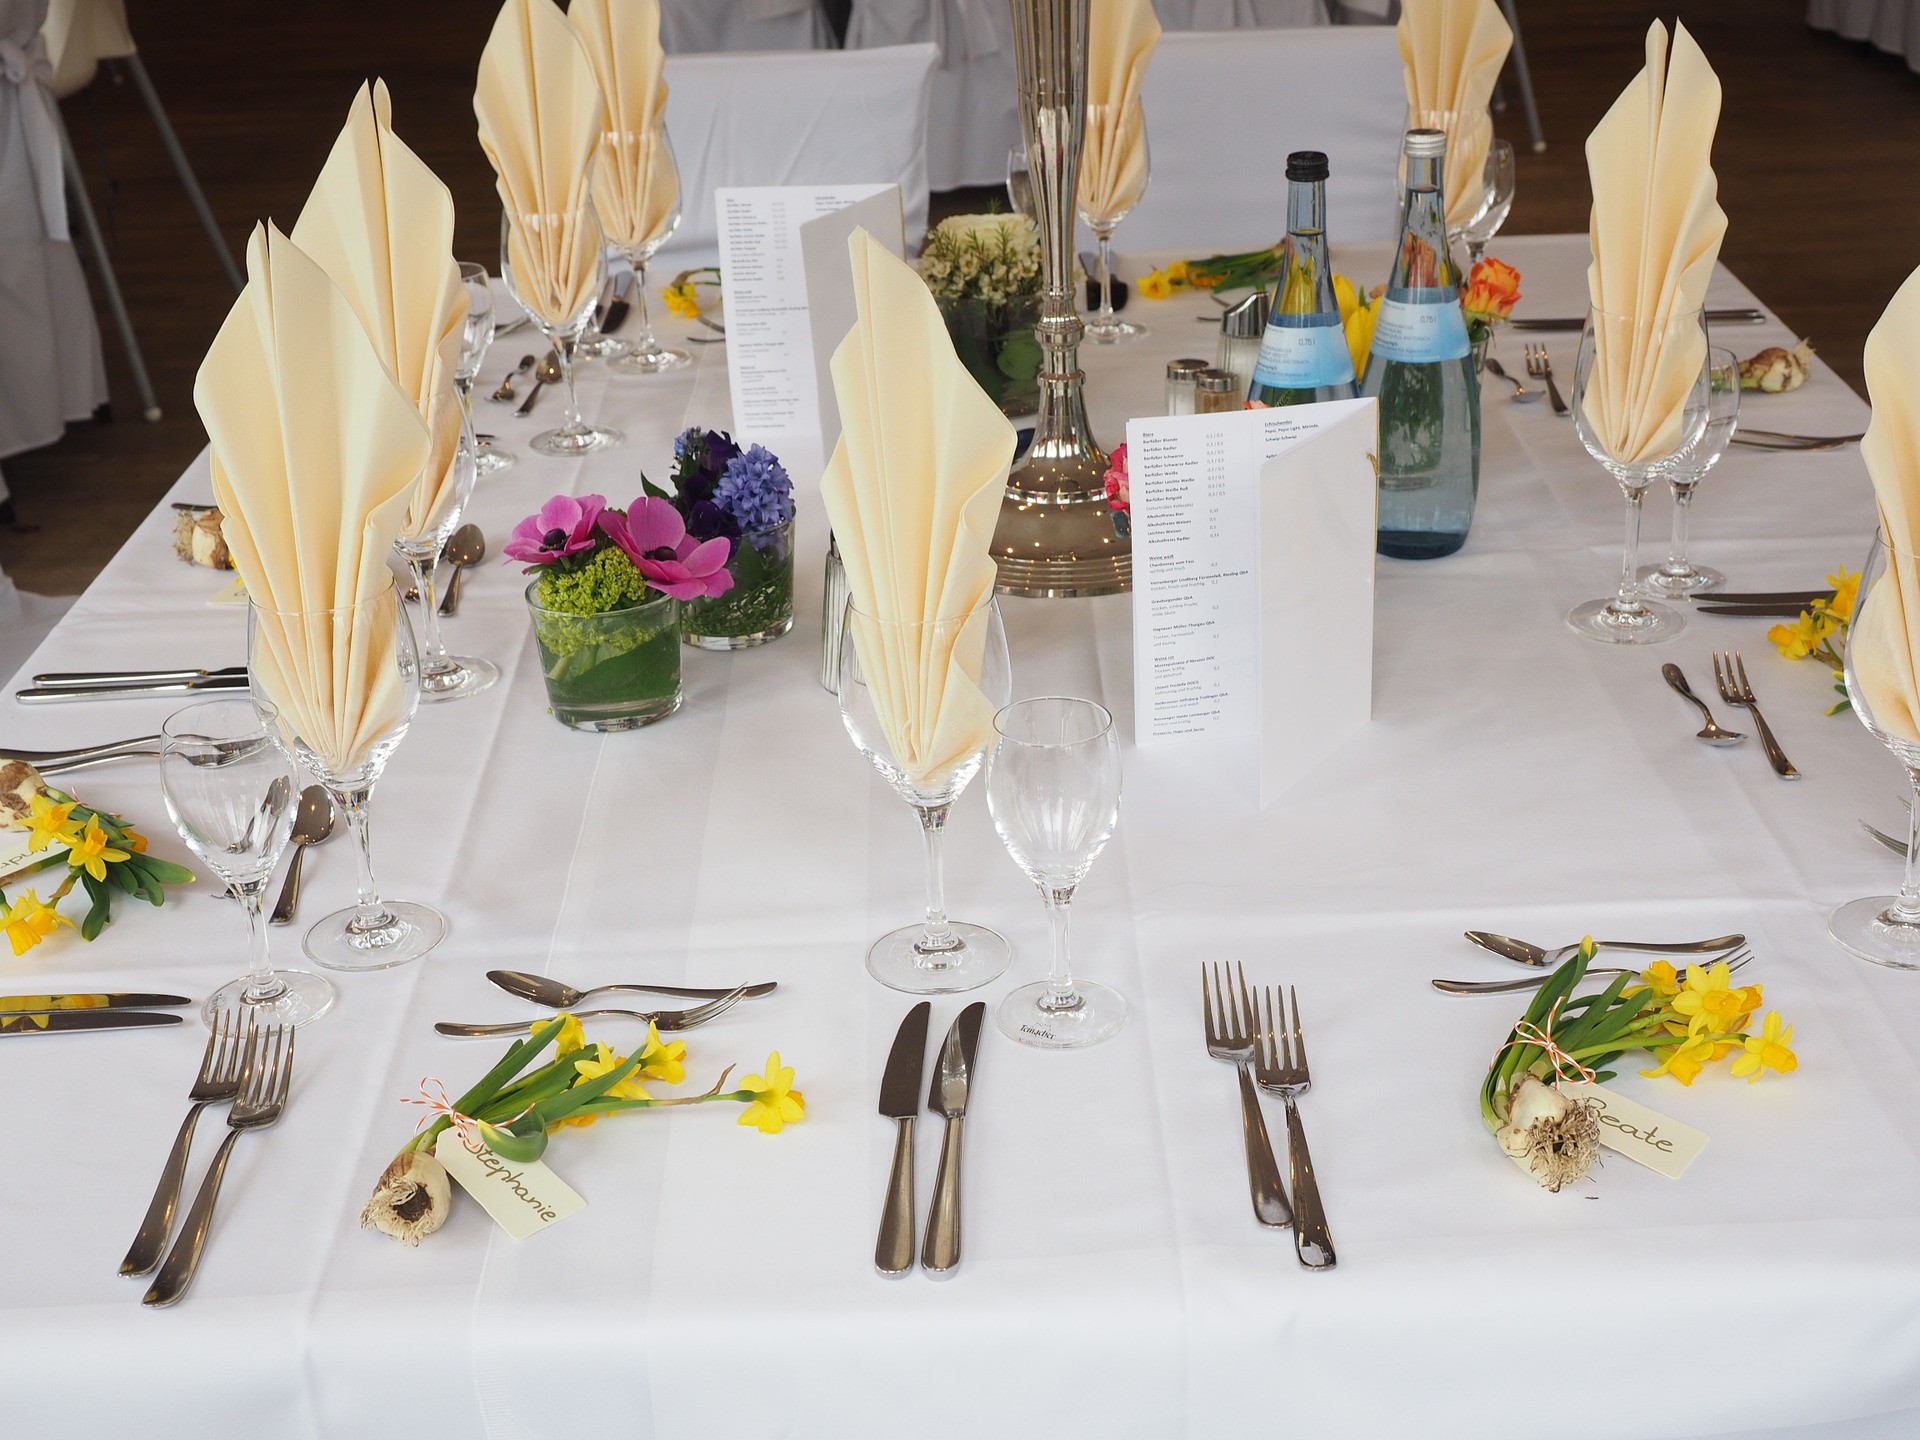 How to Use Utensils at a Formal Dinner